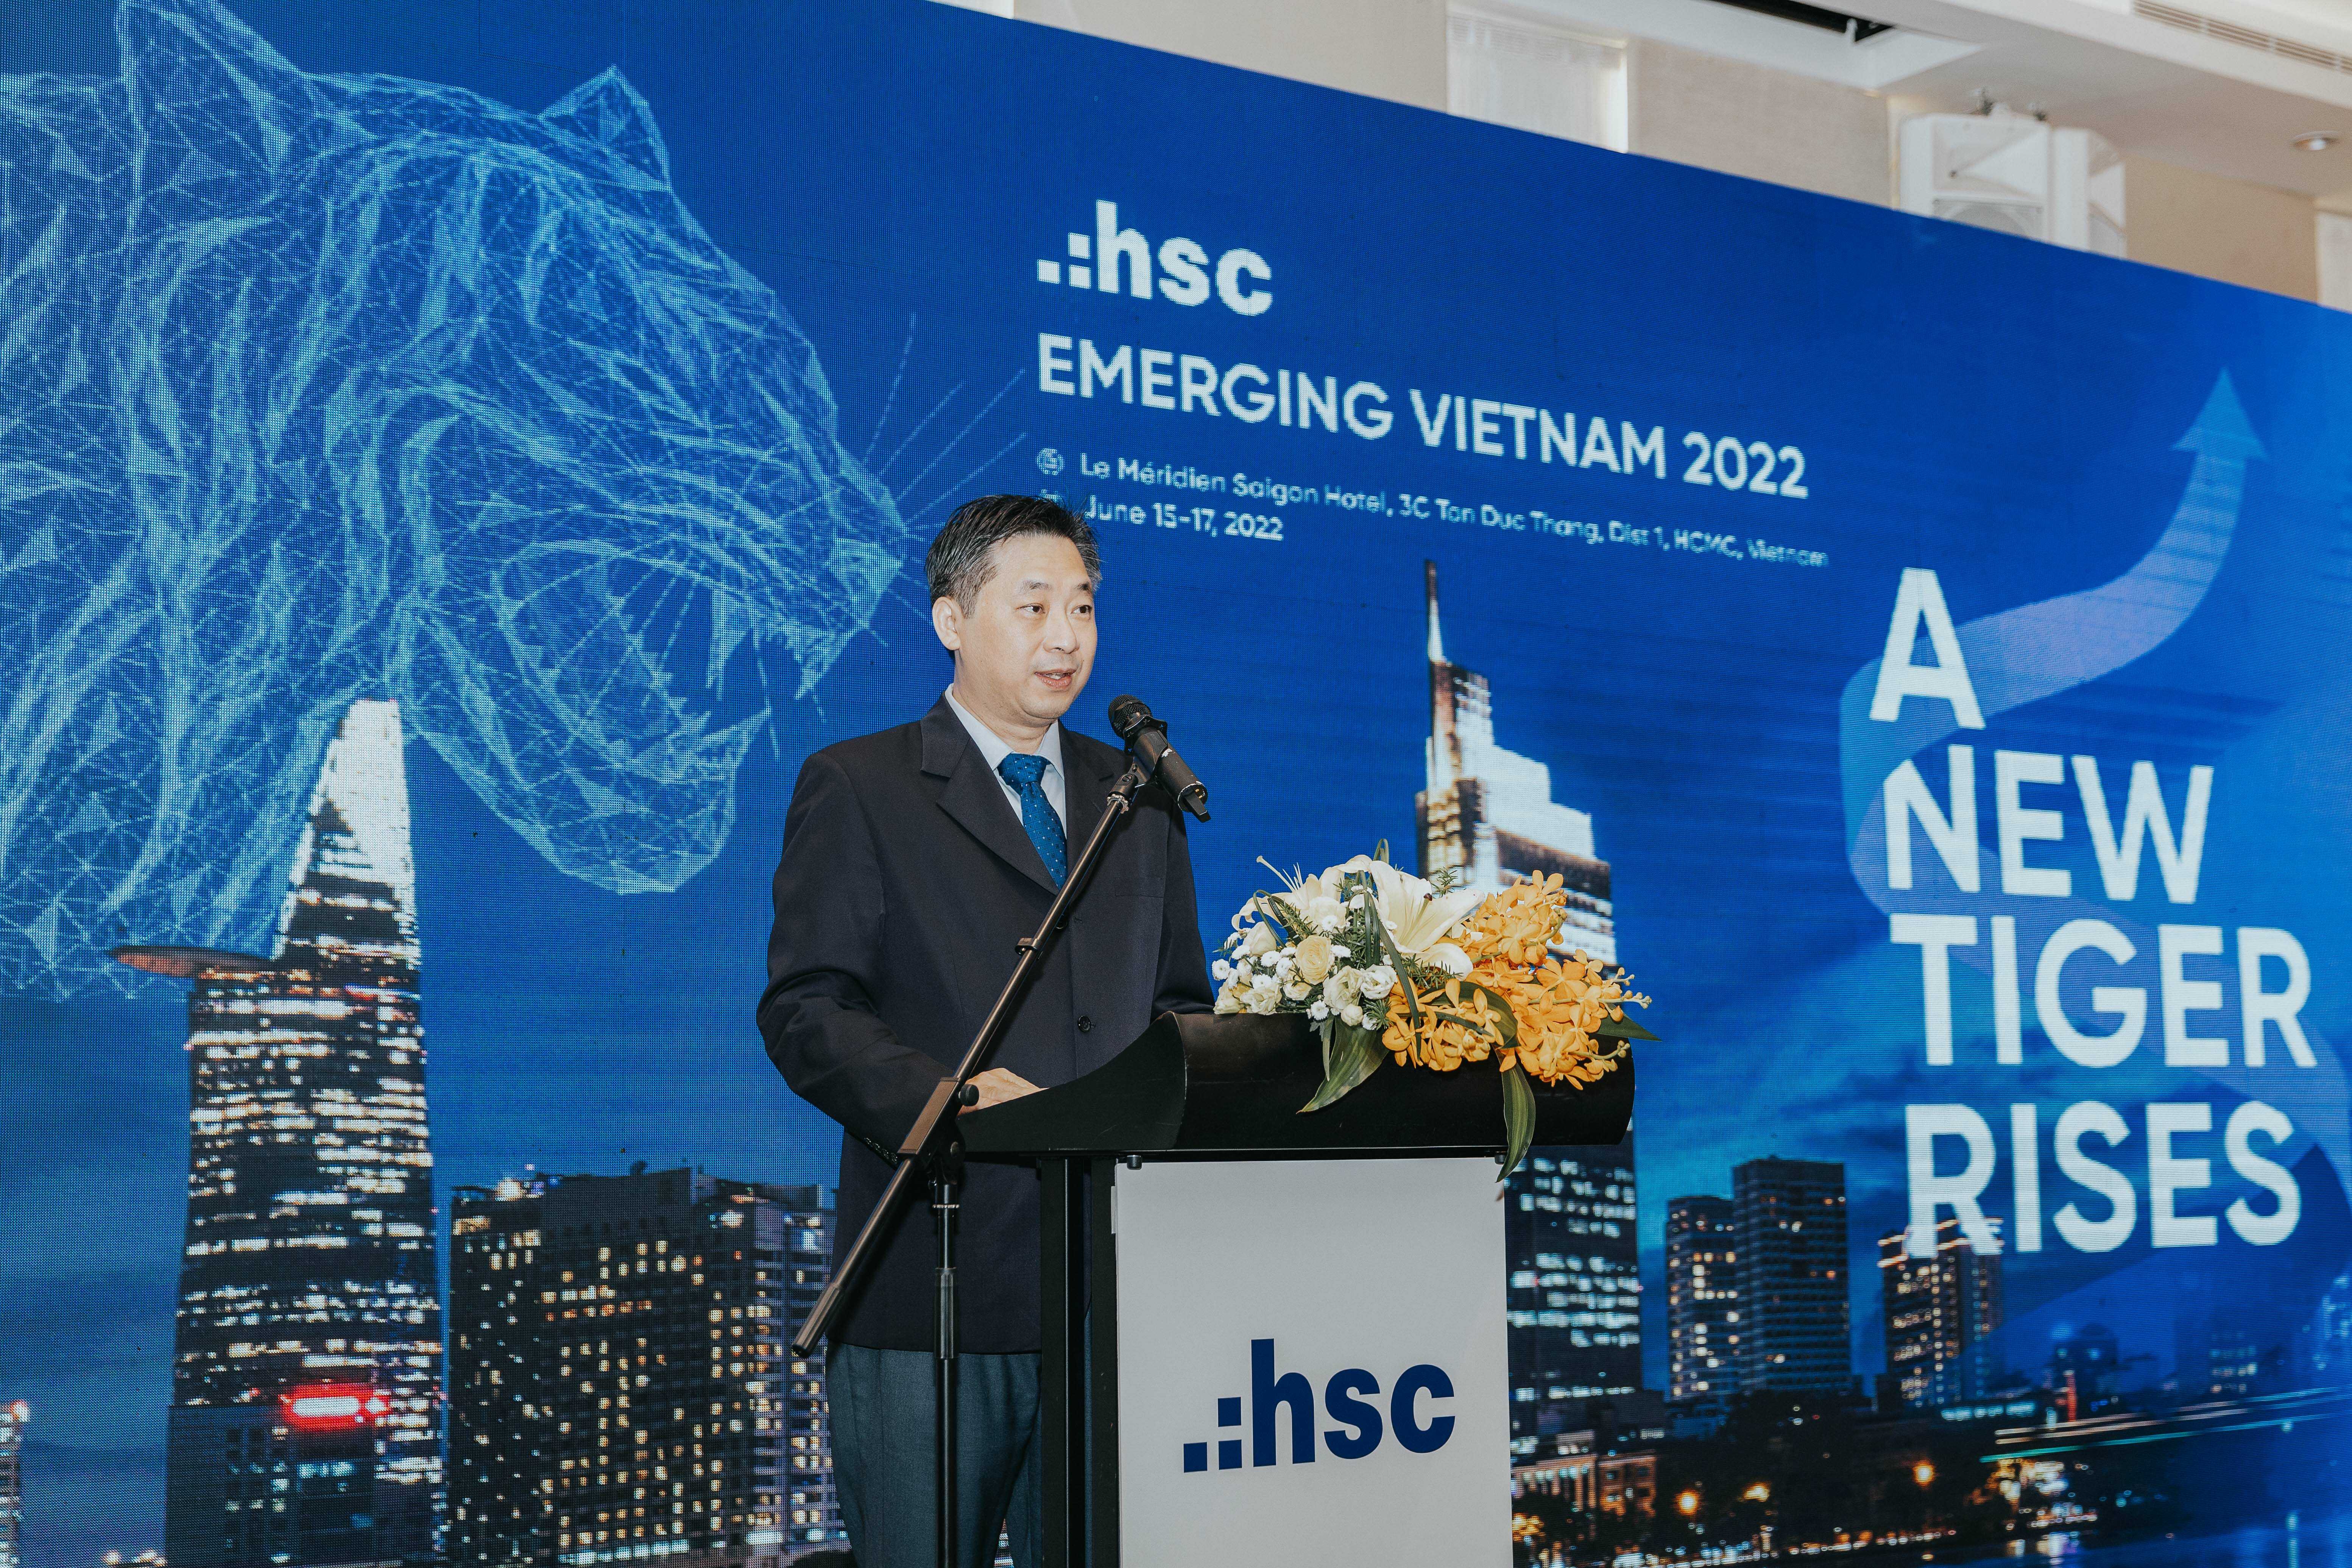 HSC successfully organized Emerging Vietnam 2022 conference